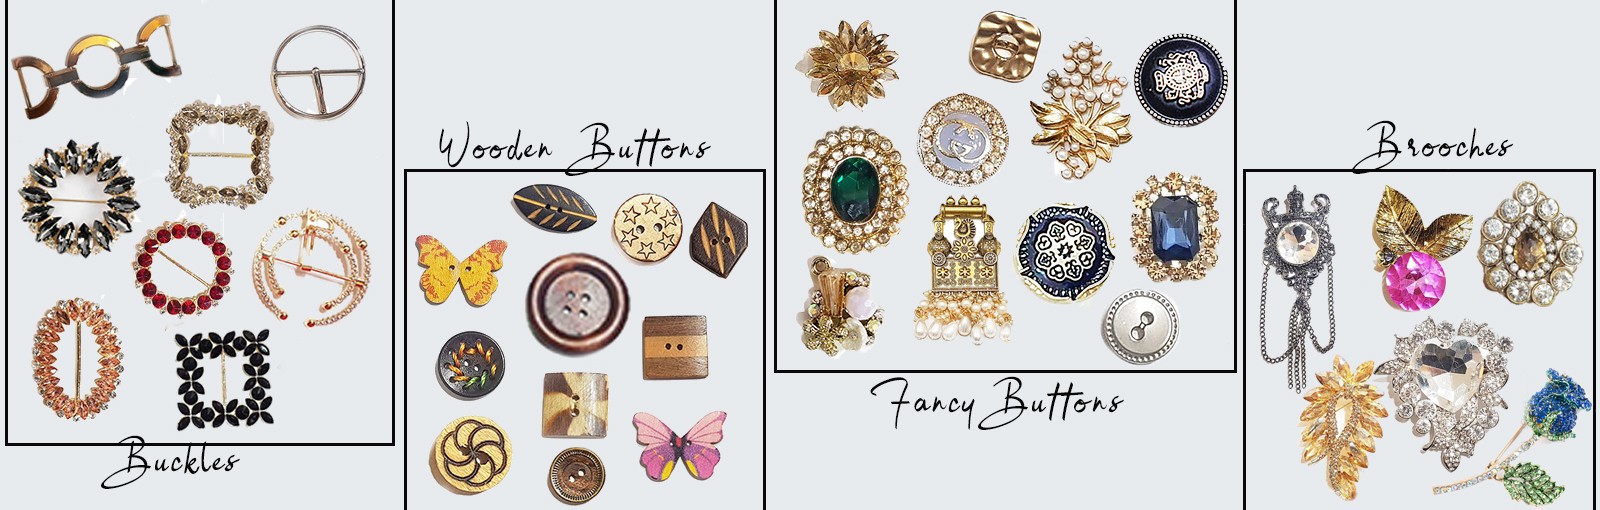 Buttons, Brooches, Buckles